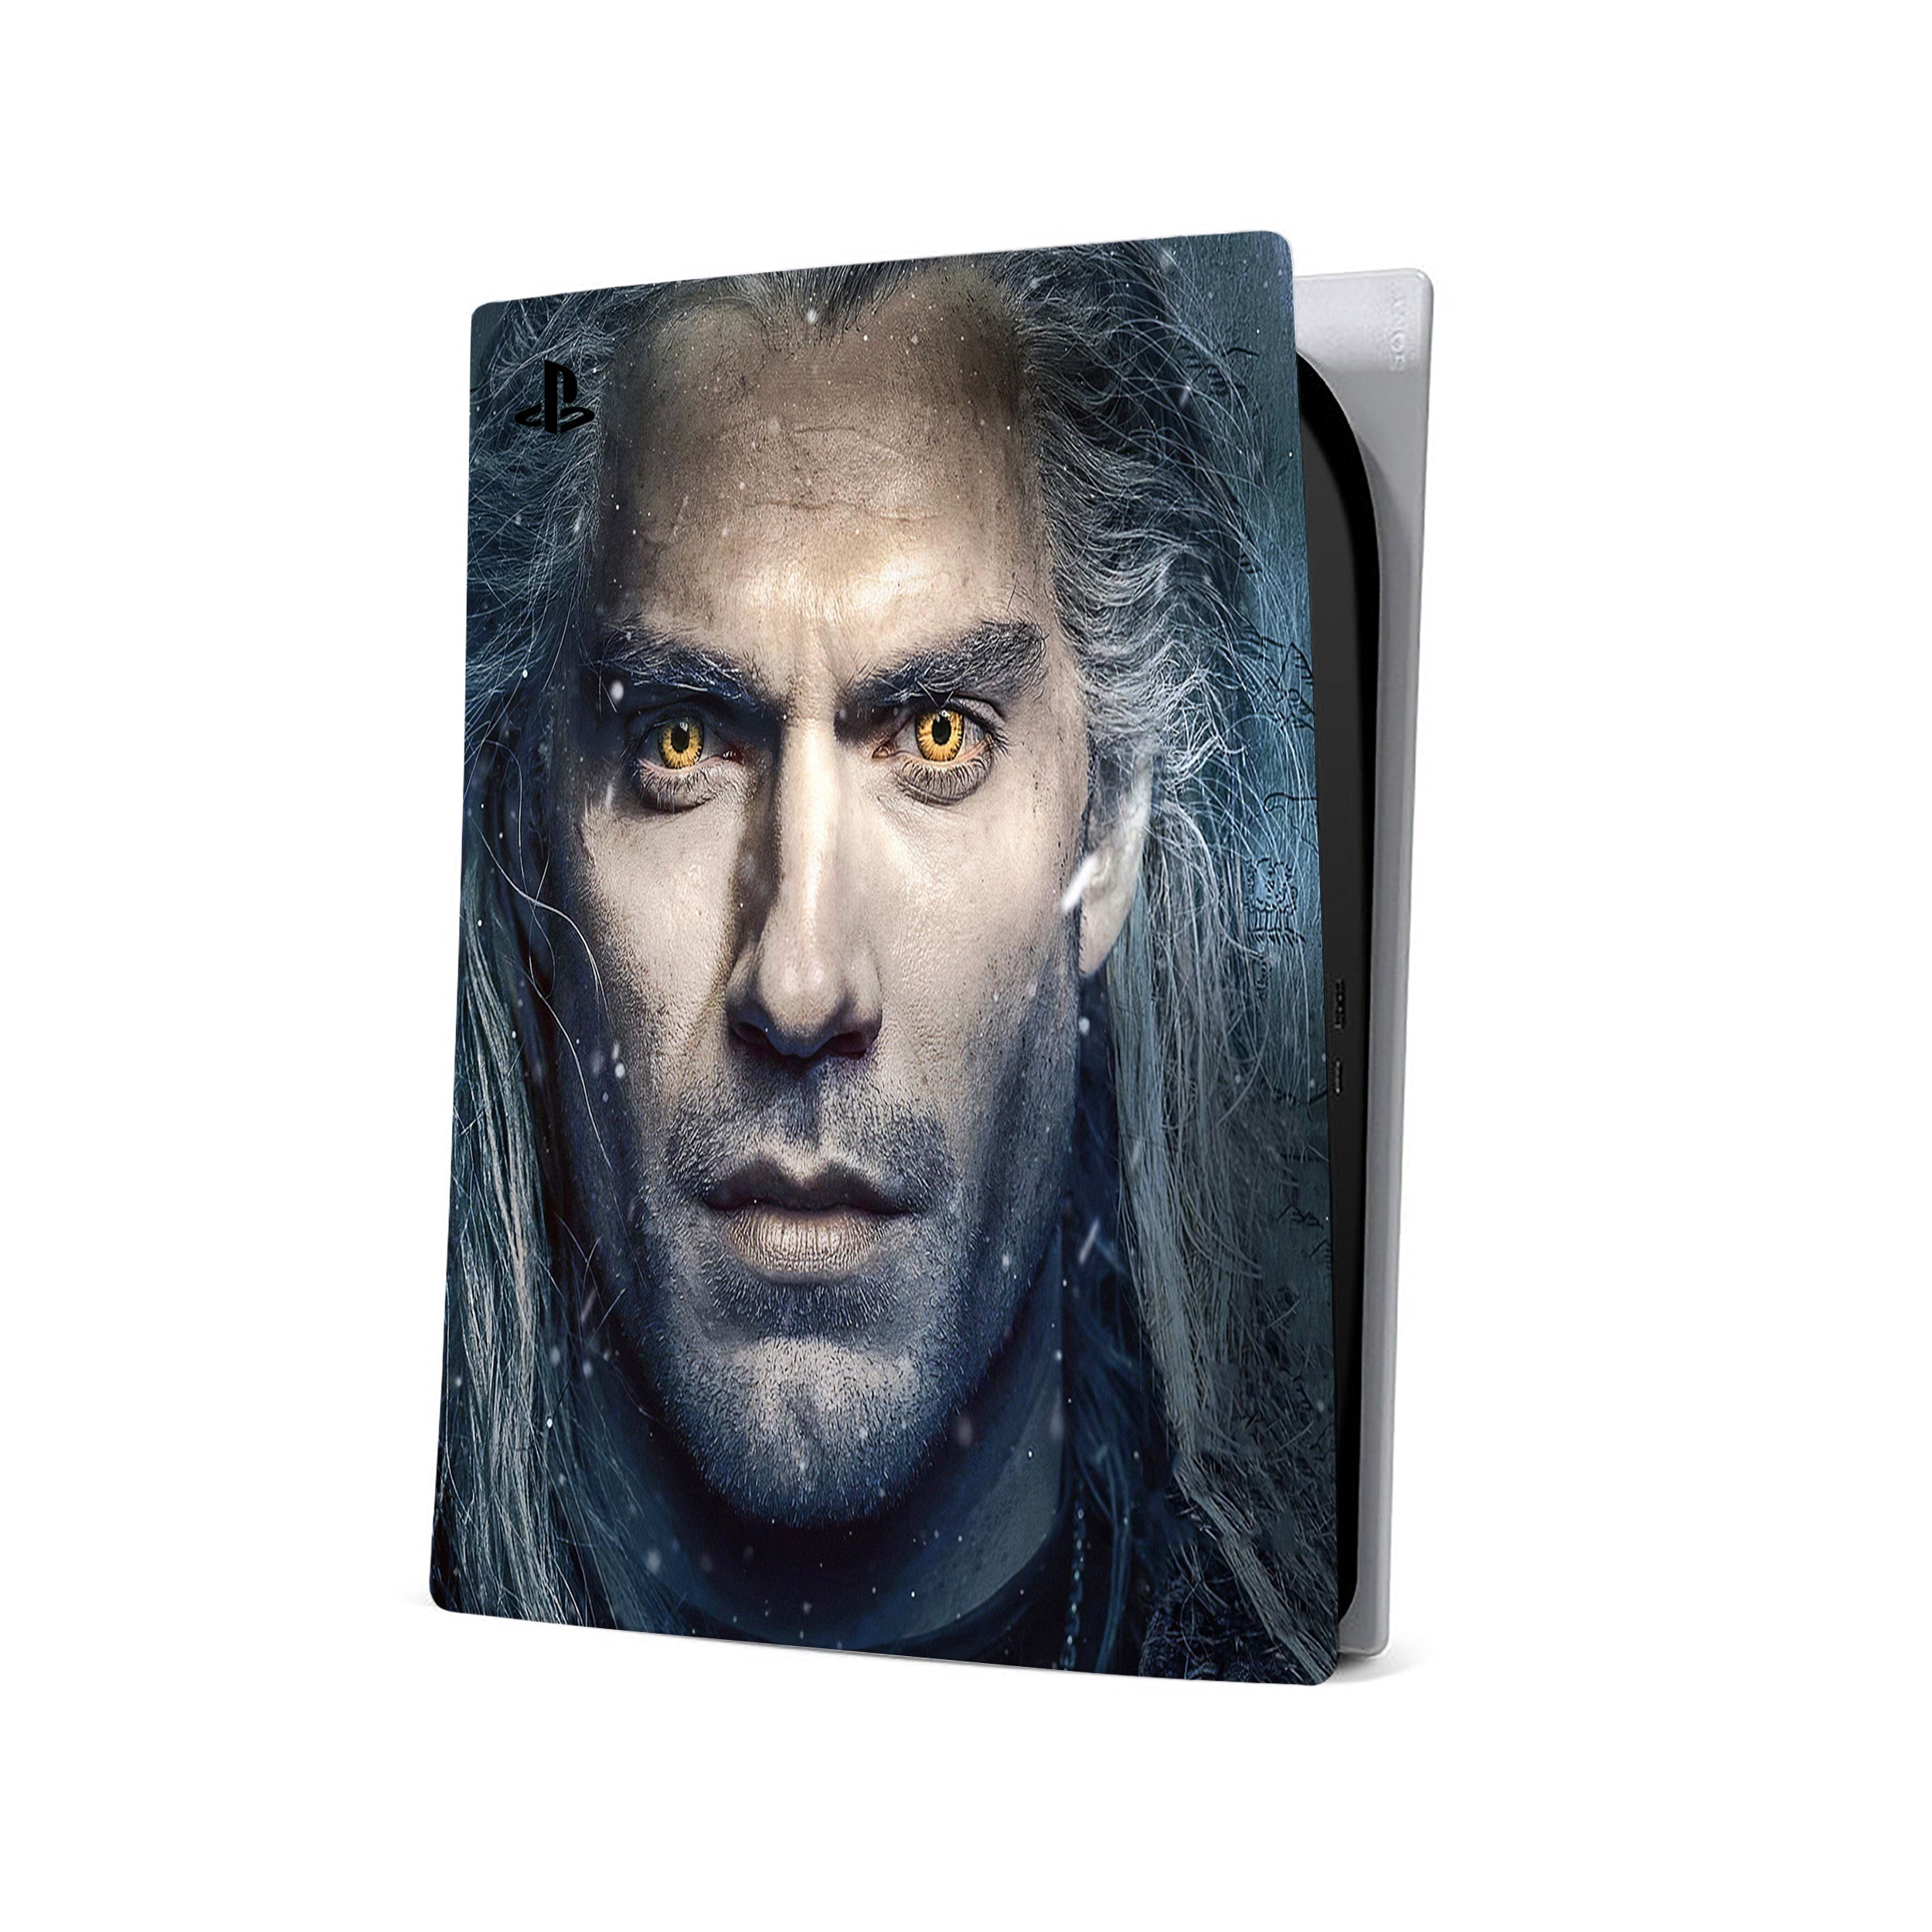 A video game skin featuring a The Witcher design for the PS5.